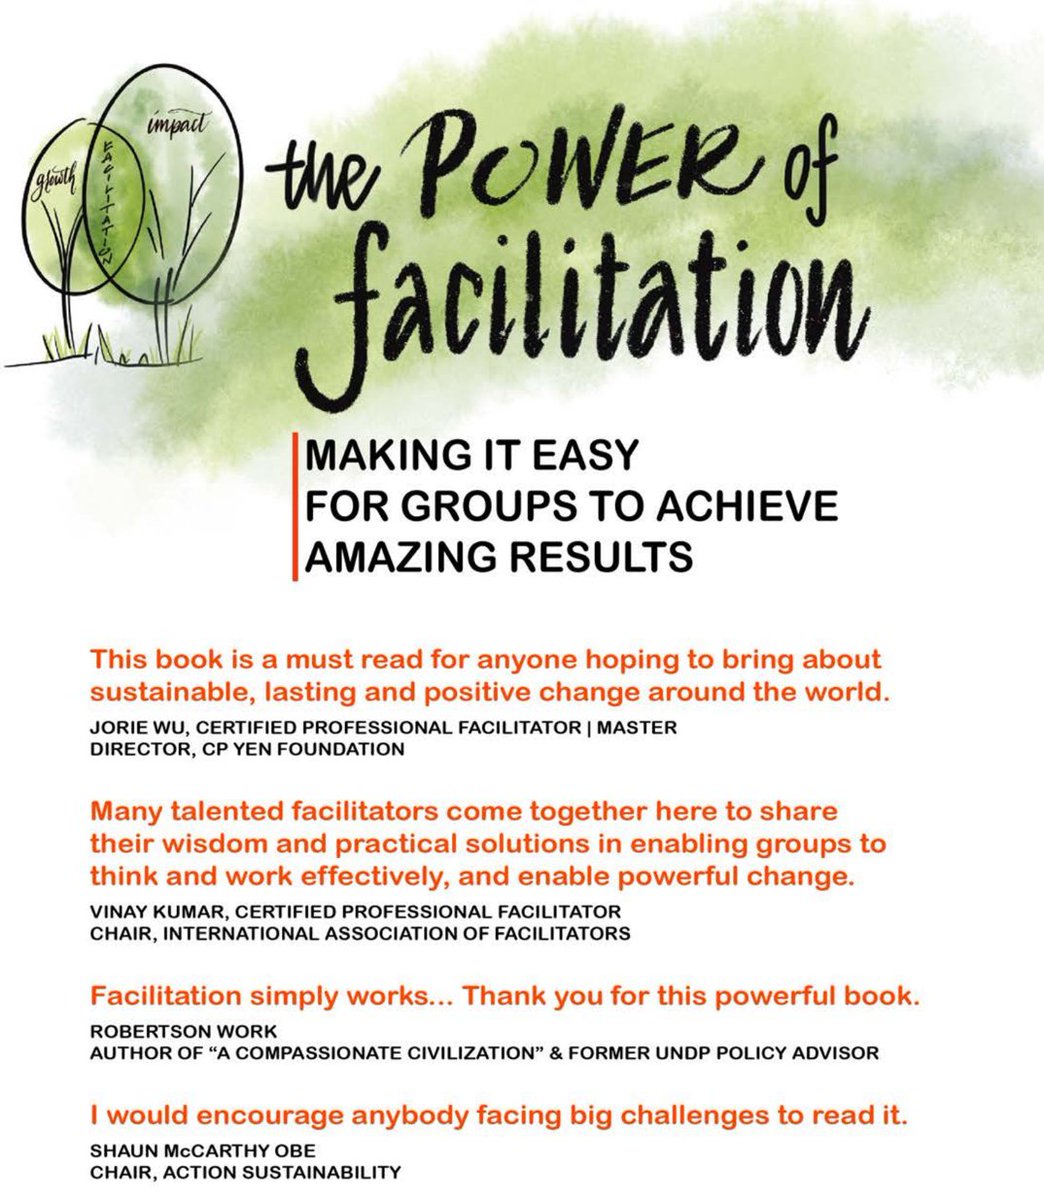 There was a great response to my last tweet saying that facilitation skills are a 'must-have' superpower for leaders. You can download an outstanding free eBook on the power of facilitation here: facpower.org/download/ Thanks @FacPower for your generosity in sharing this wisdom